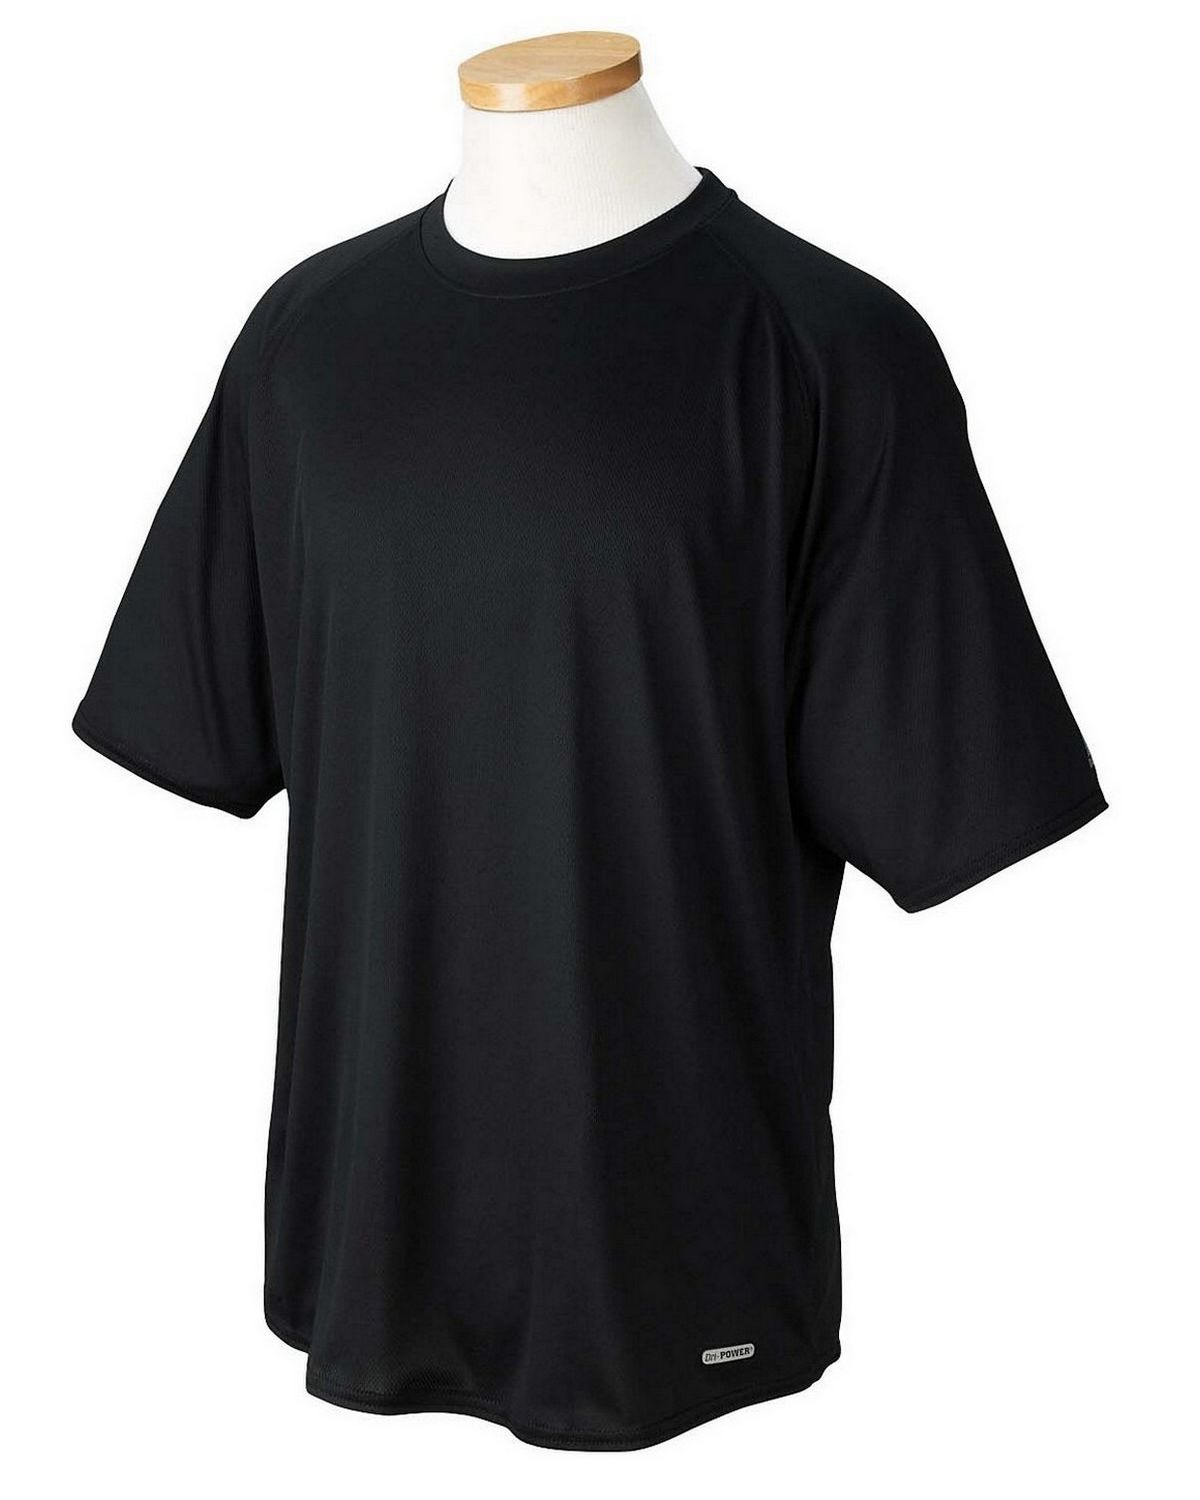 russell athletic dri fit shirts